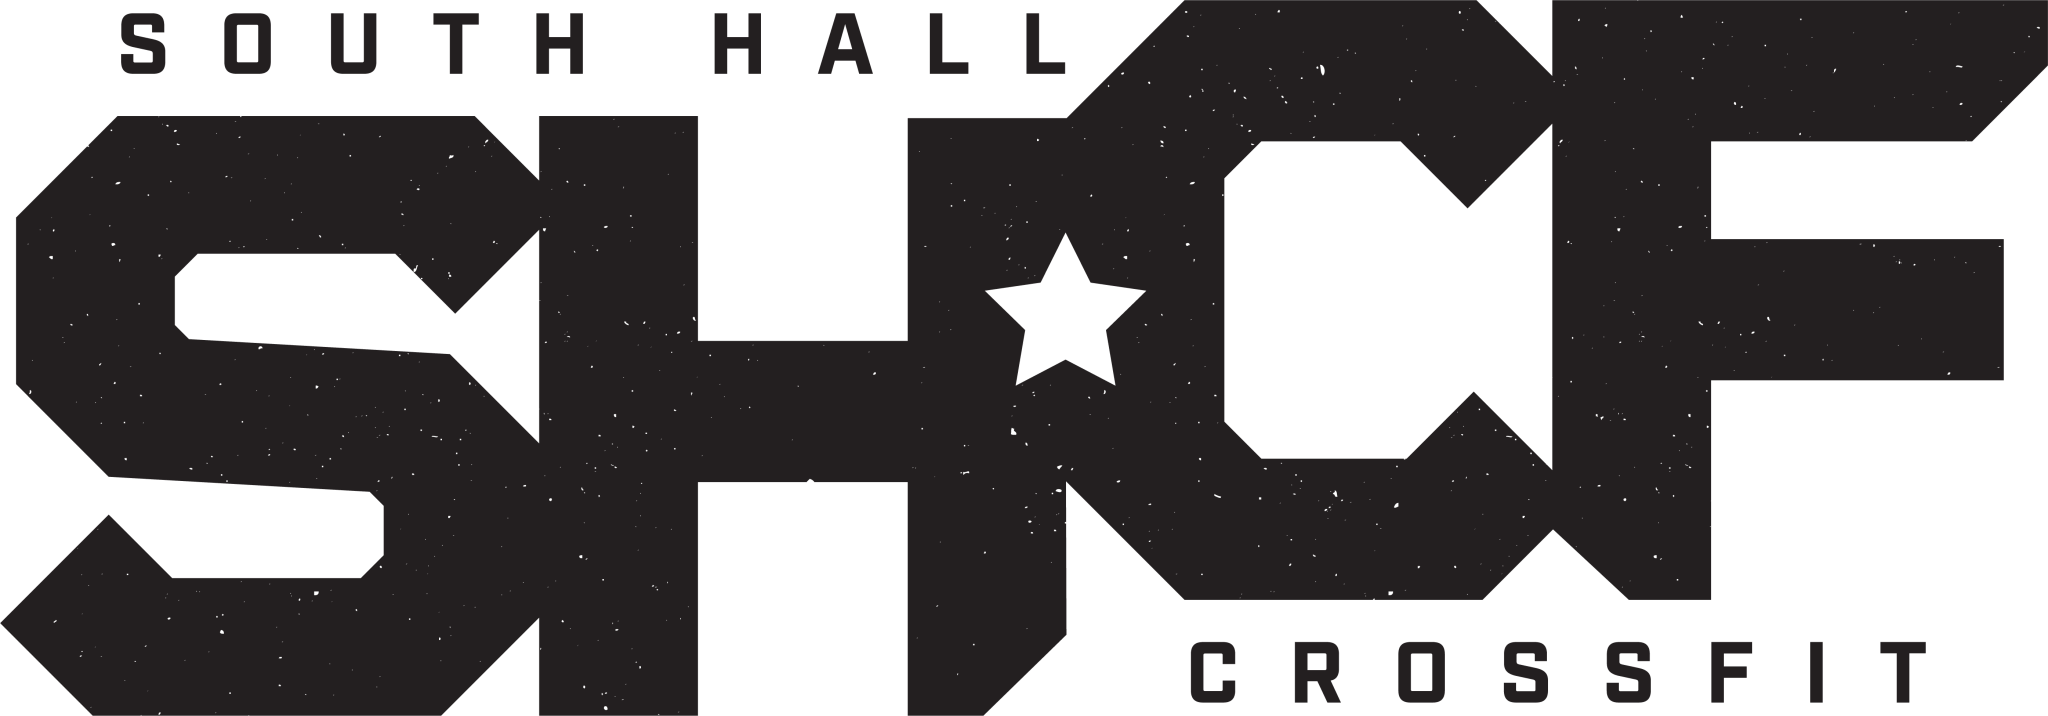 South Hall CrossFit